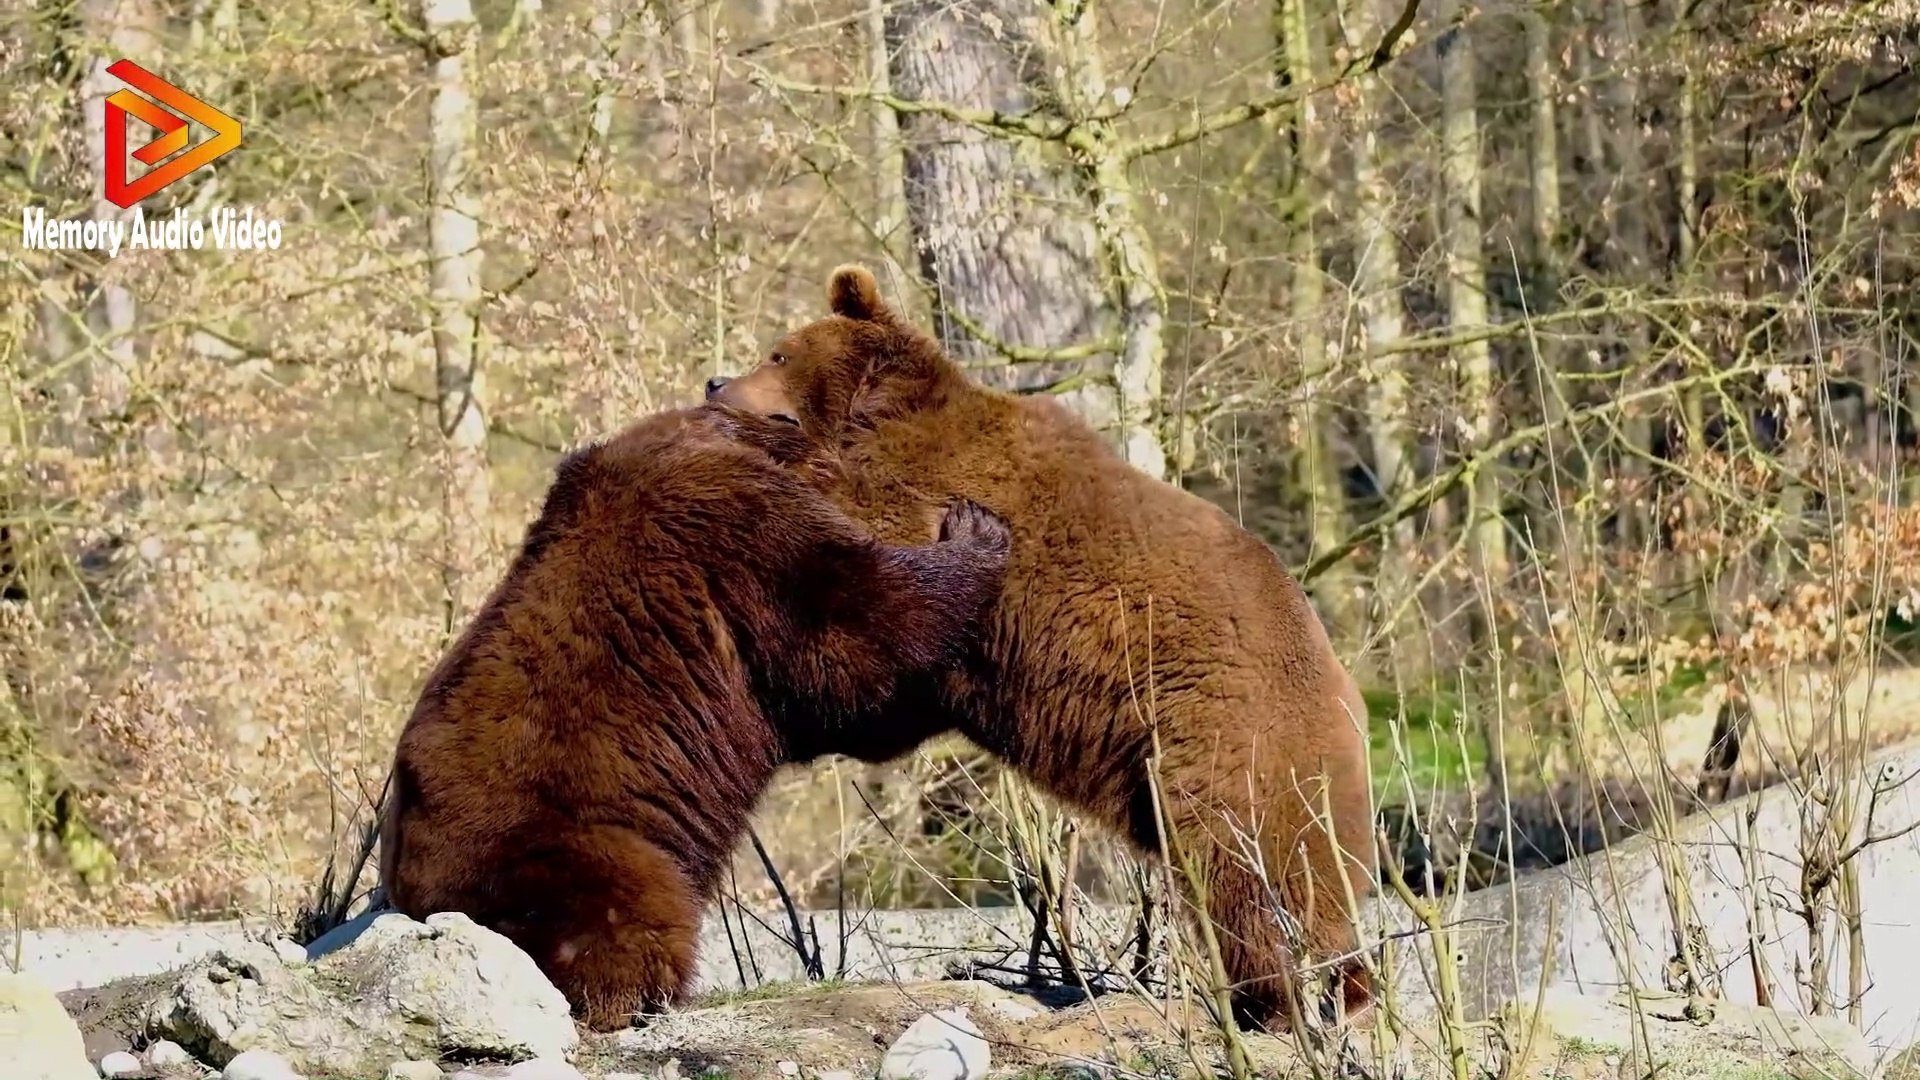 Fighting brown bears।Mother Bear Teaches Cubs।Mother Bear Fights Male for Prime Fishing Spot। Bear